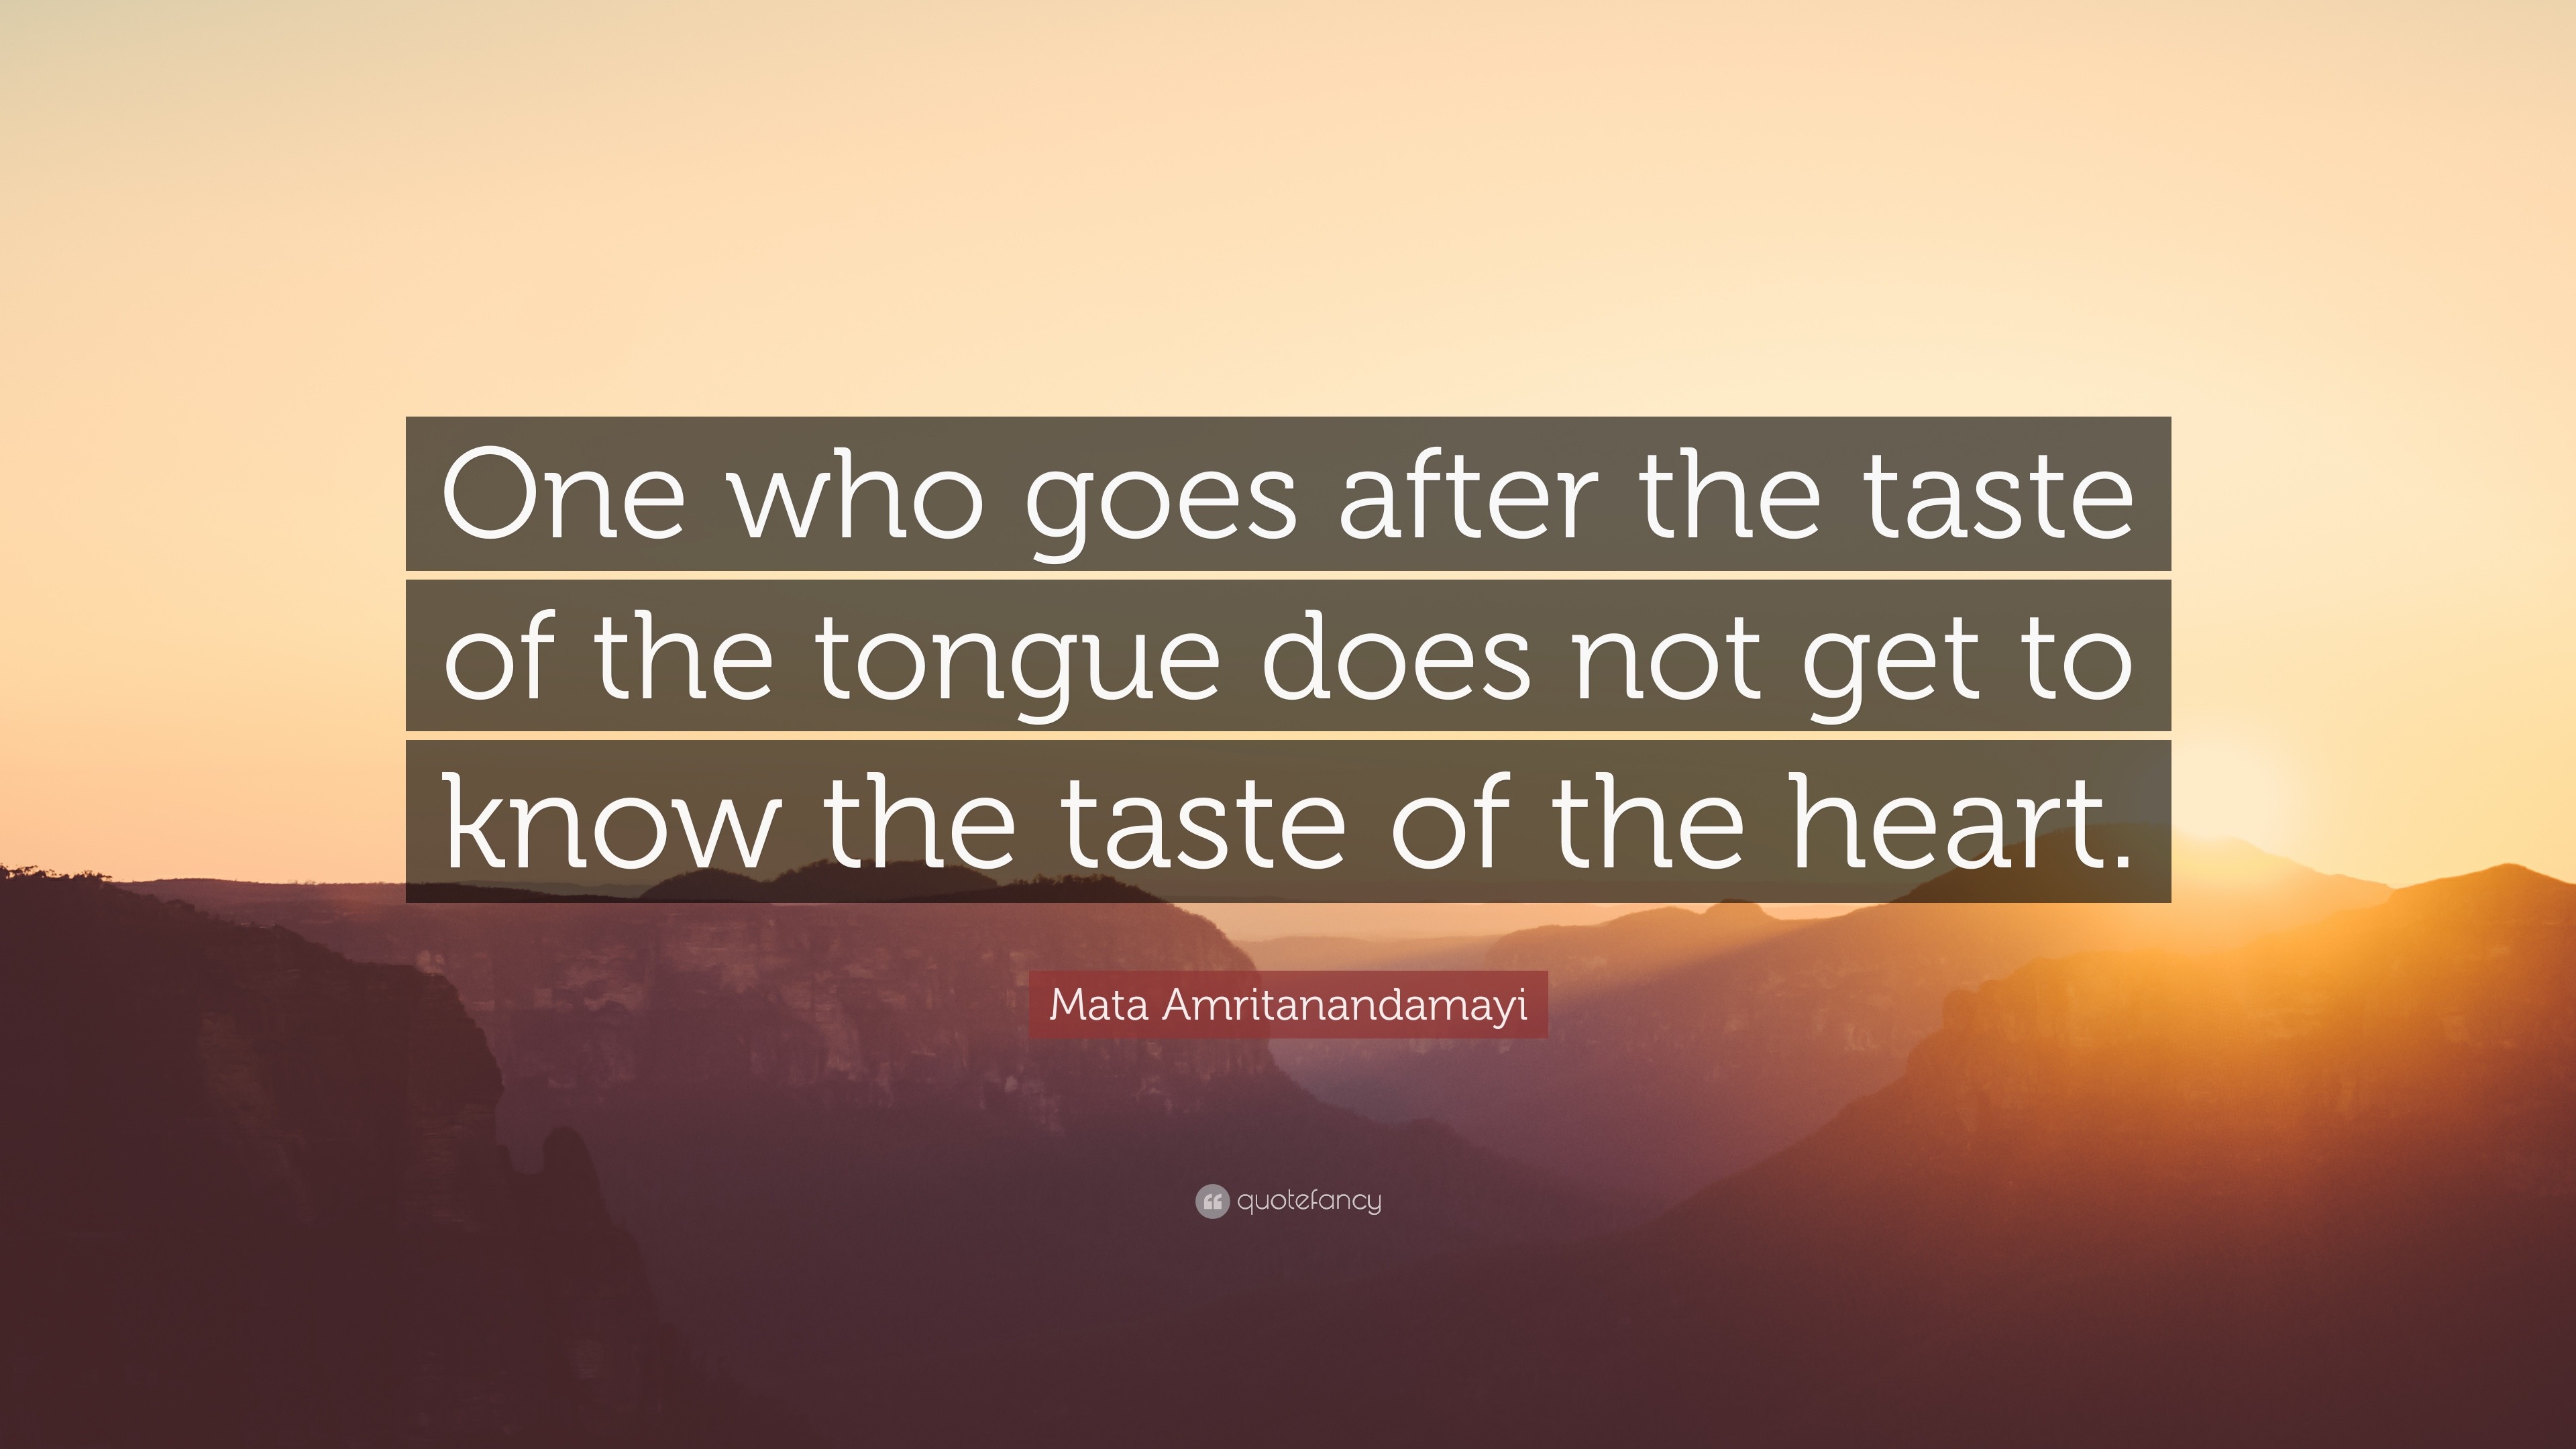 Mata Amritanandamayi Quote: “One who goes after the taste of the tongue  does not get to